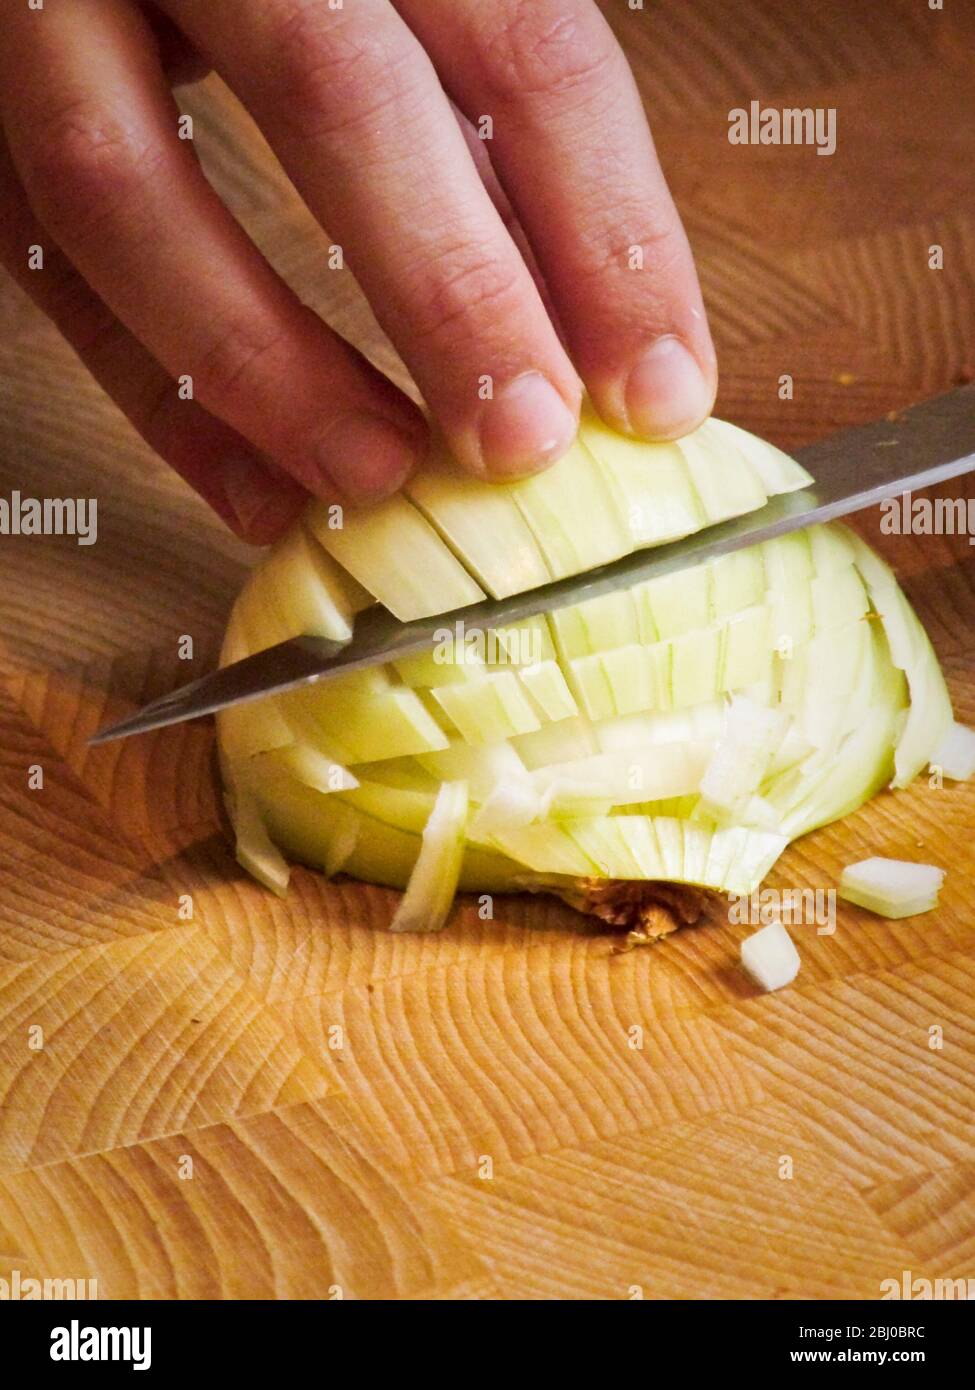 Child learning to chop an onion - Stock Photo